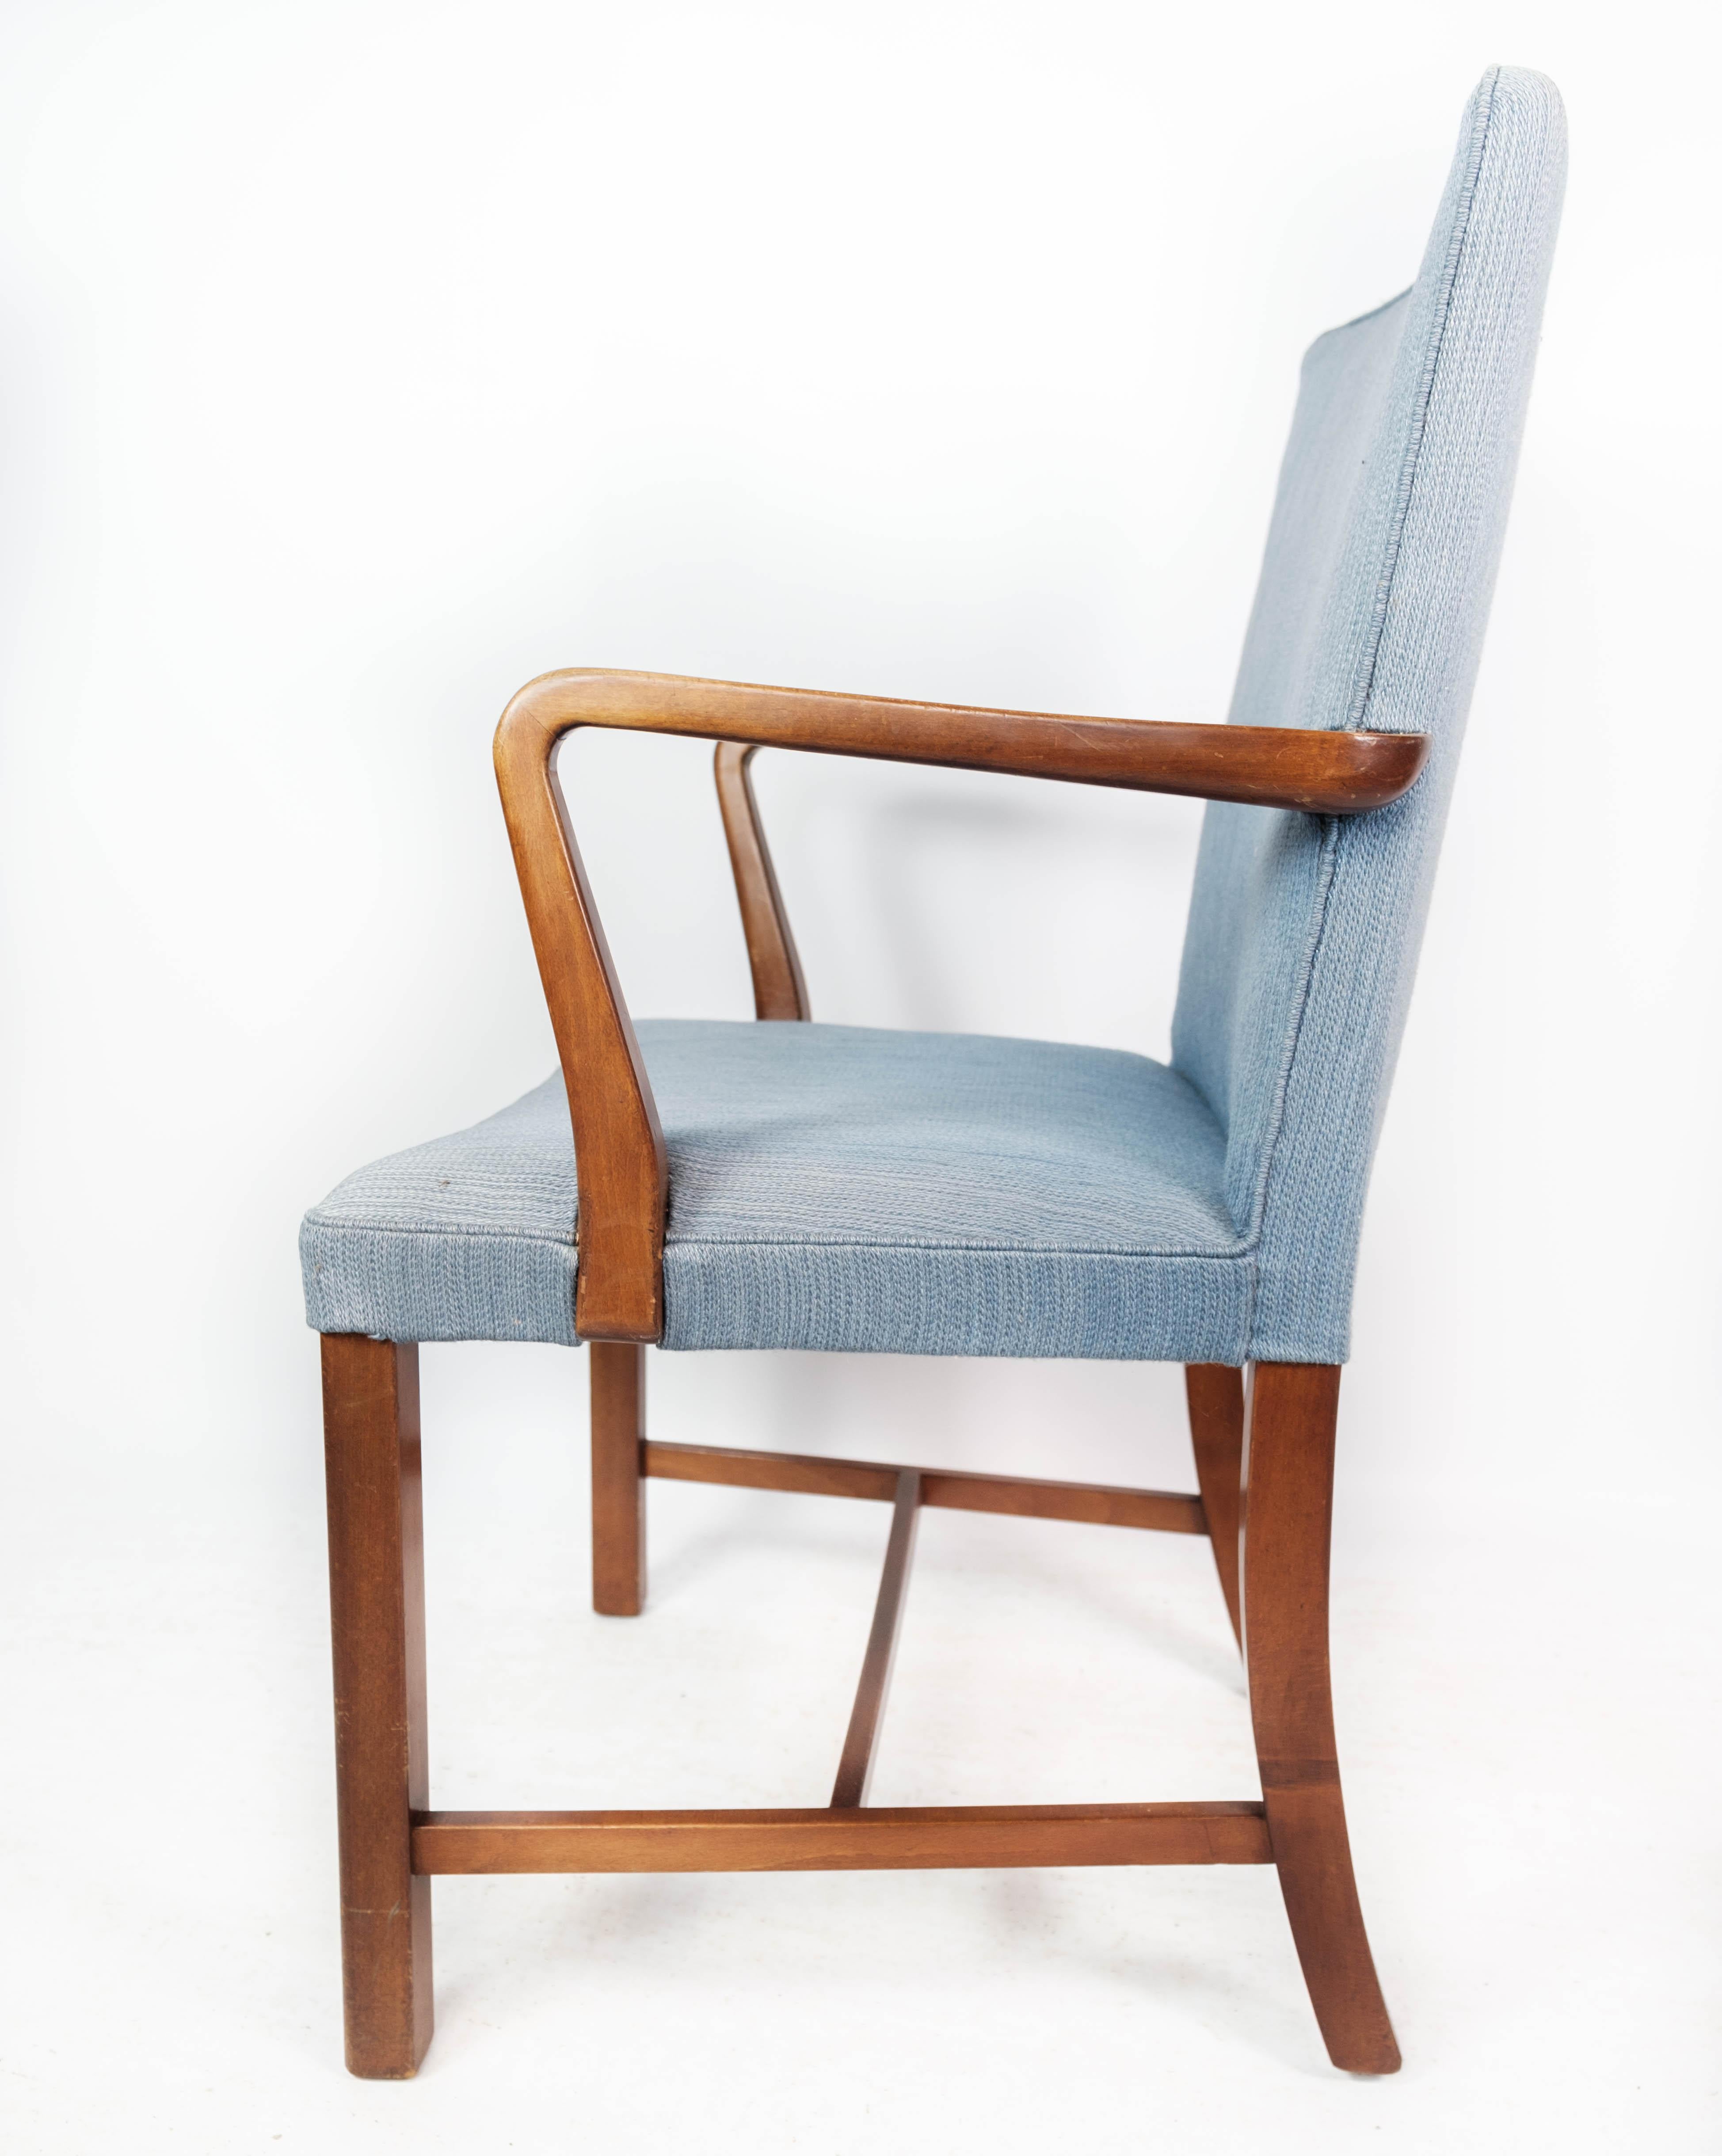 Mid-20th Century Armchair in Mahogany and Upholstered with Light Blue Fabric by Fritz Hansen For Sale